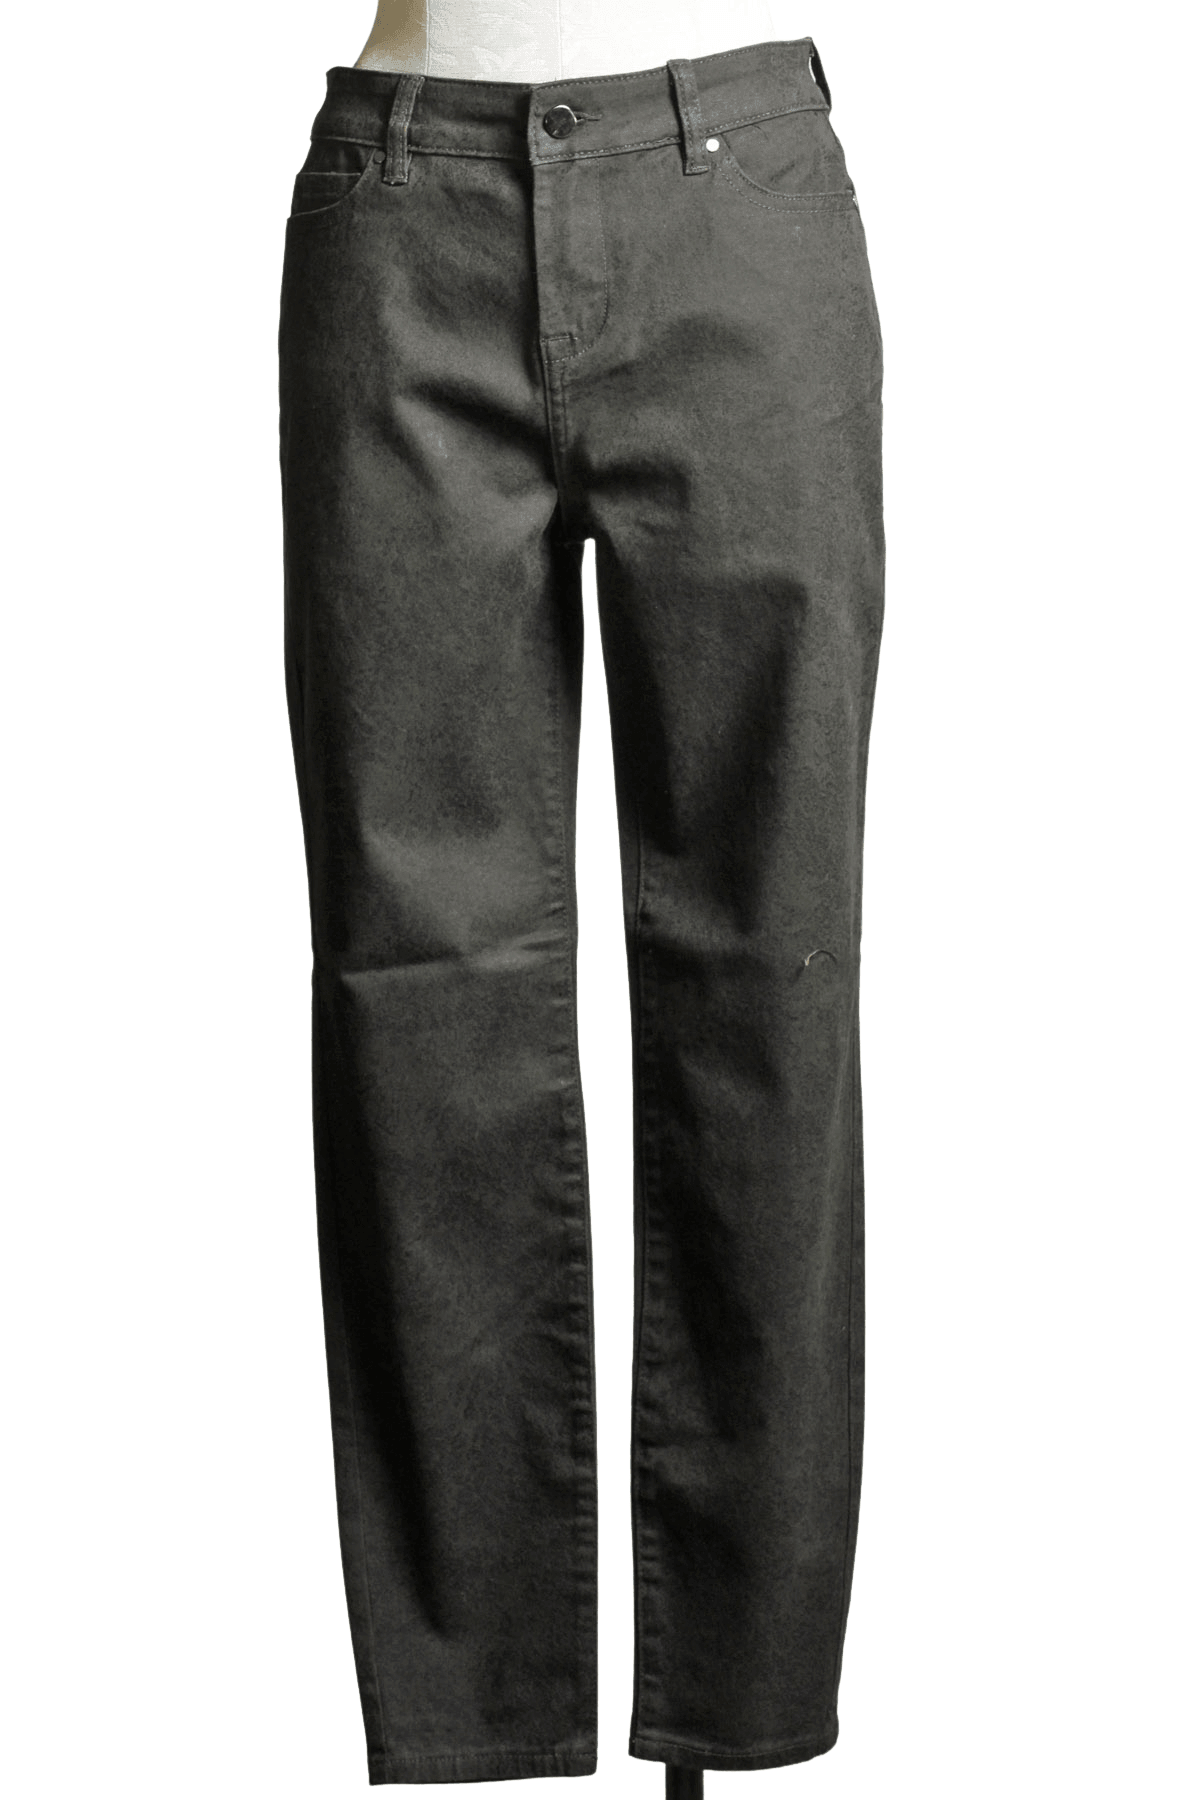 Olive colored straight leg jean by Frank Lyman